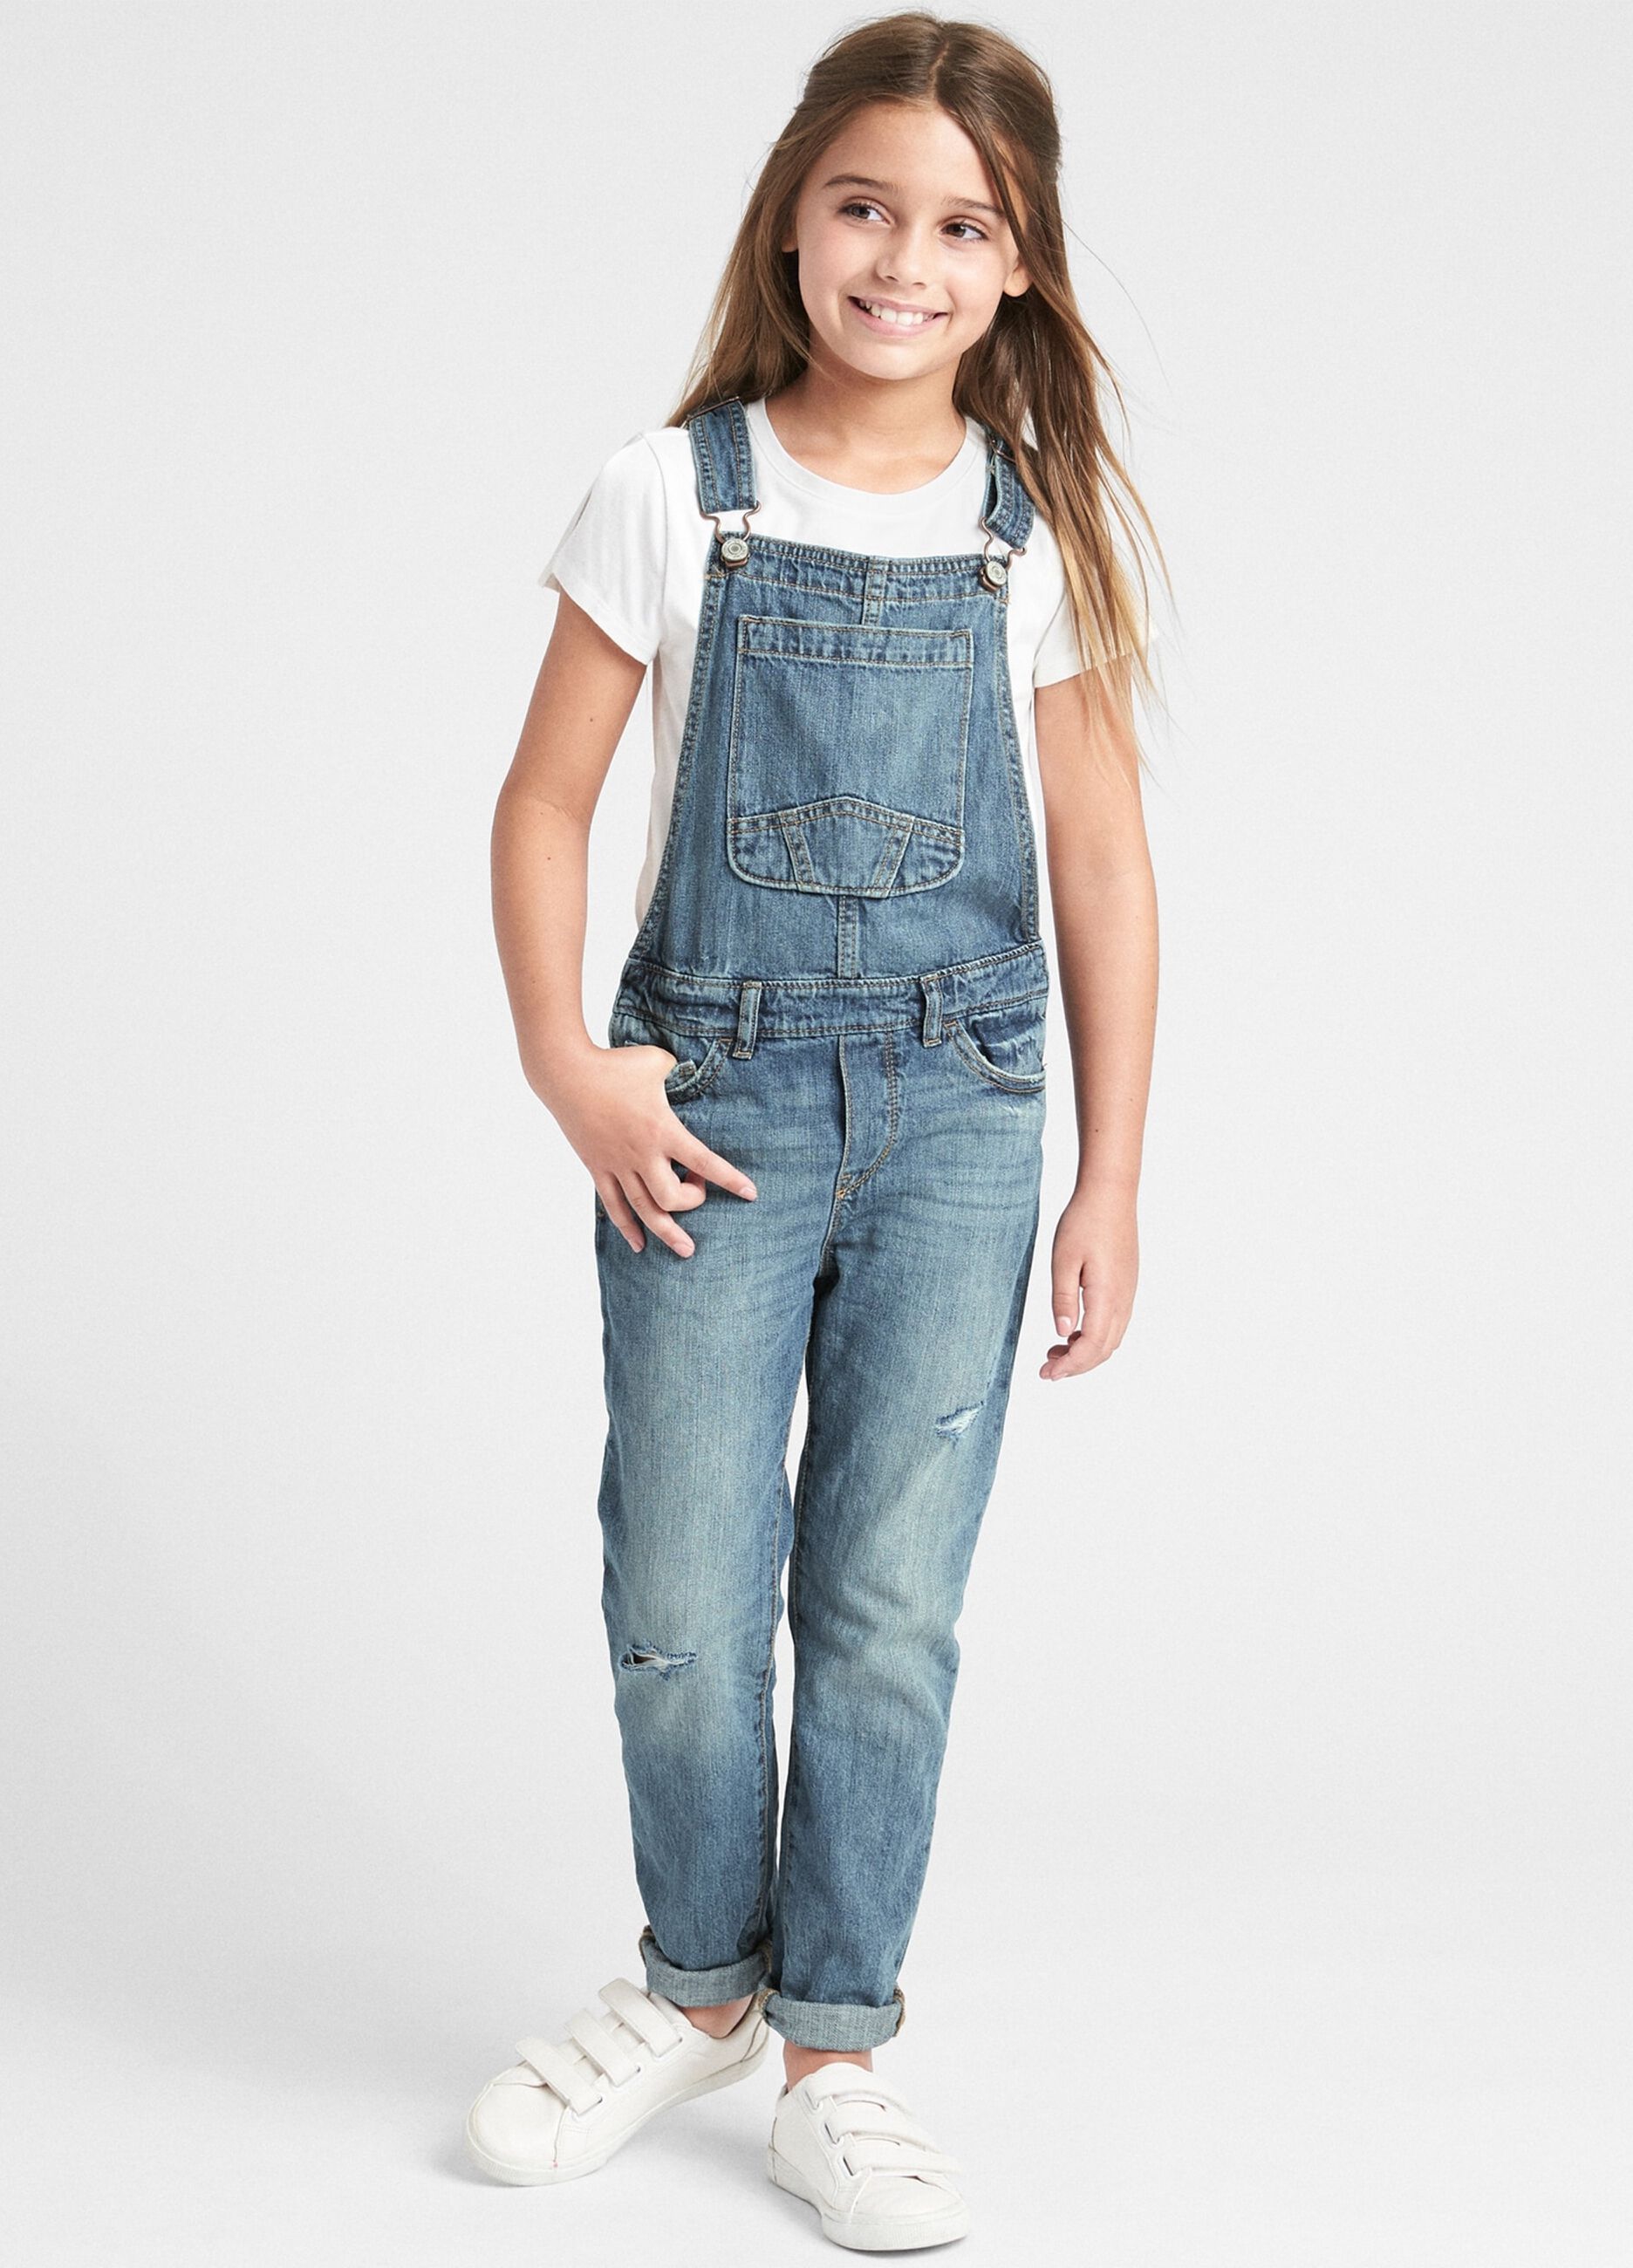 Denim dungarees with rips